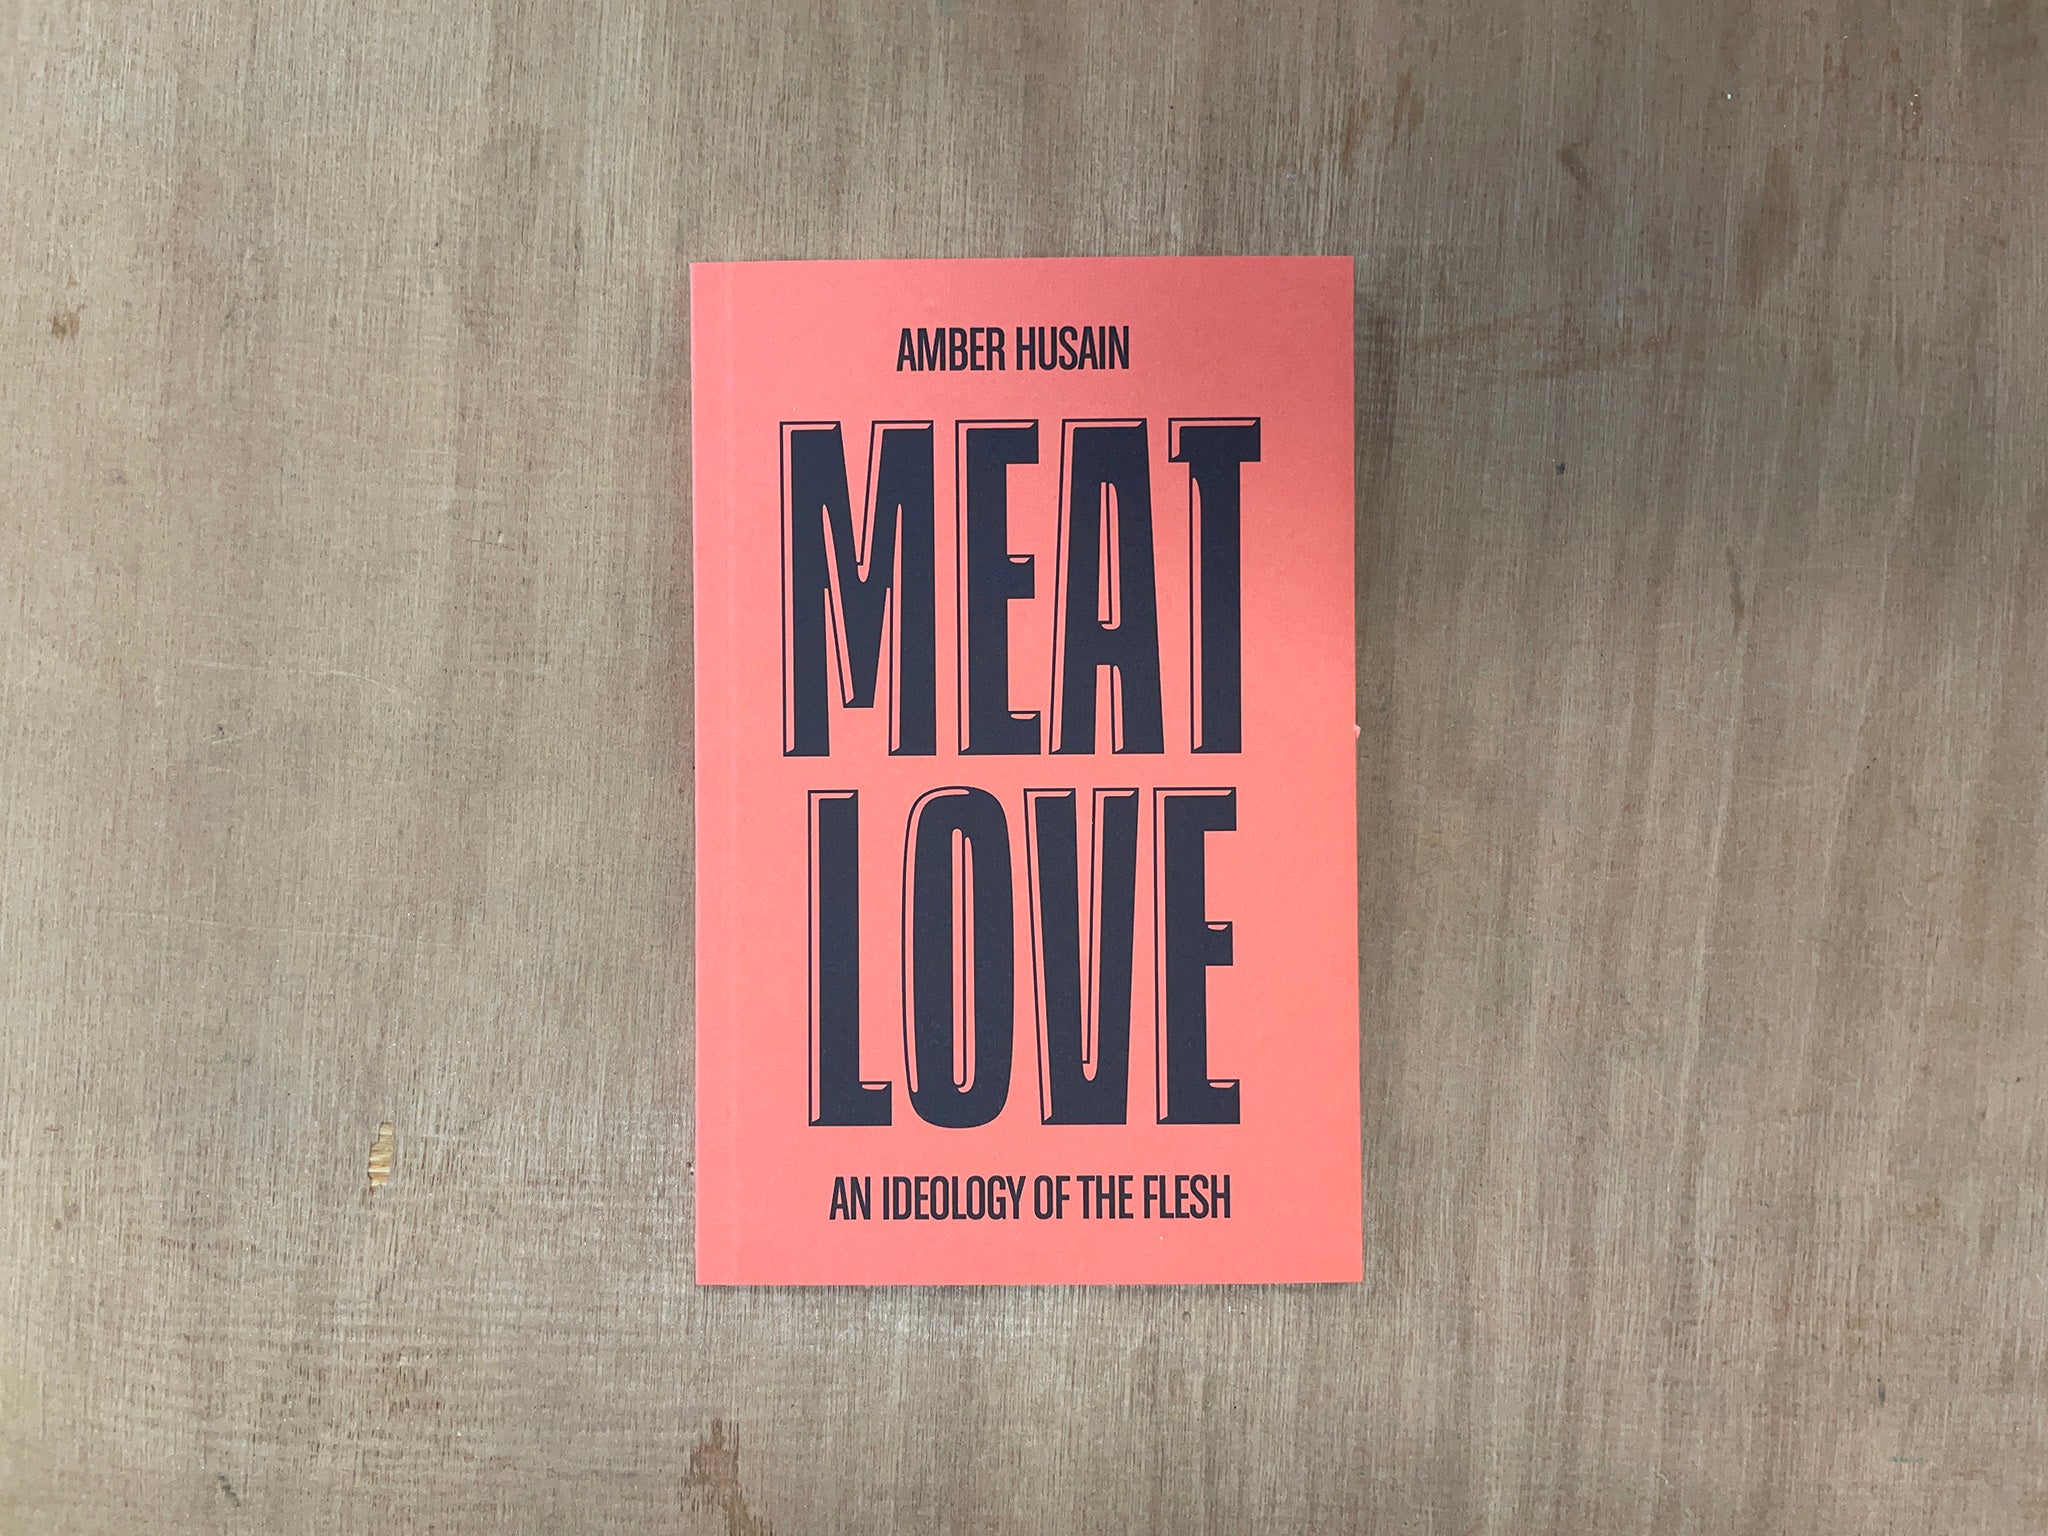 MEAT LOVE: AN IDEOLOGY OF THE FLESH by Amber Husain